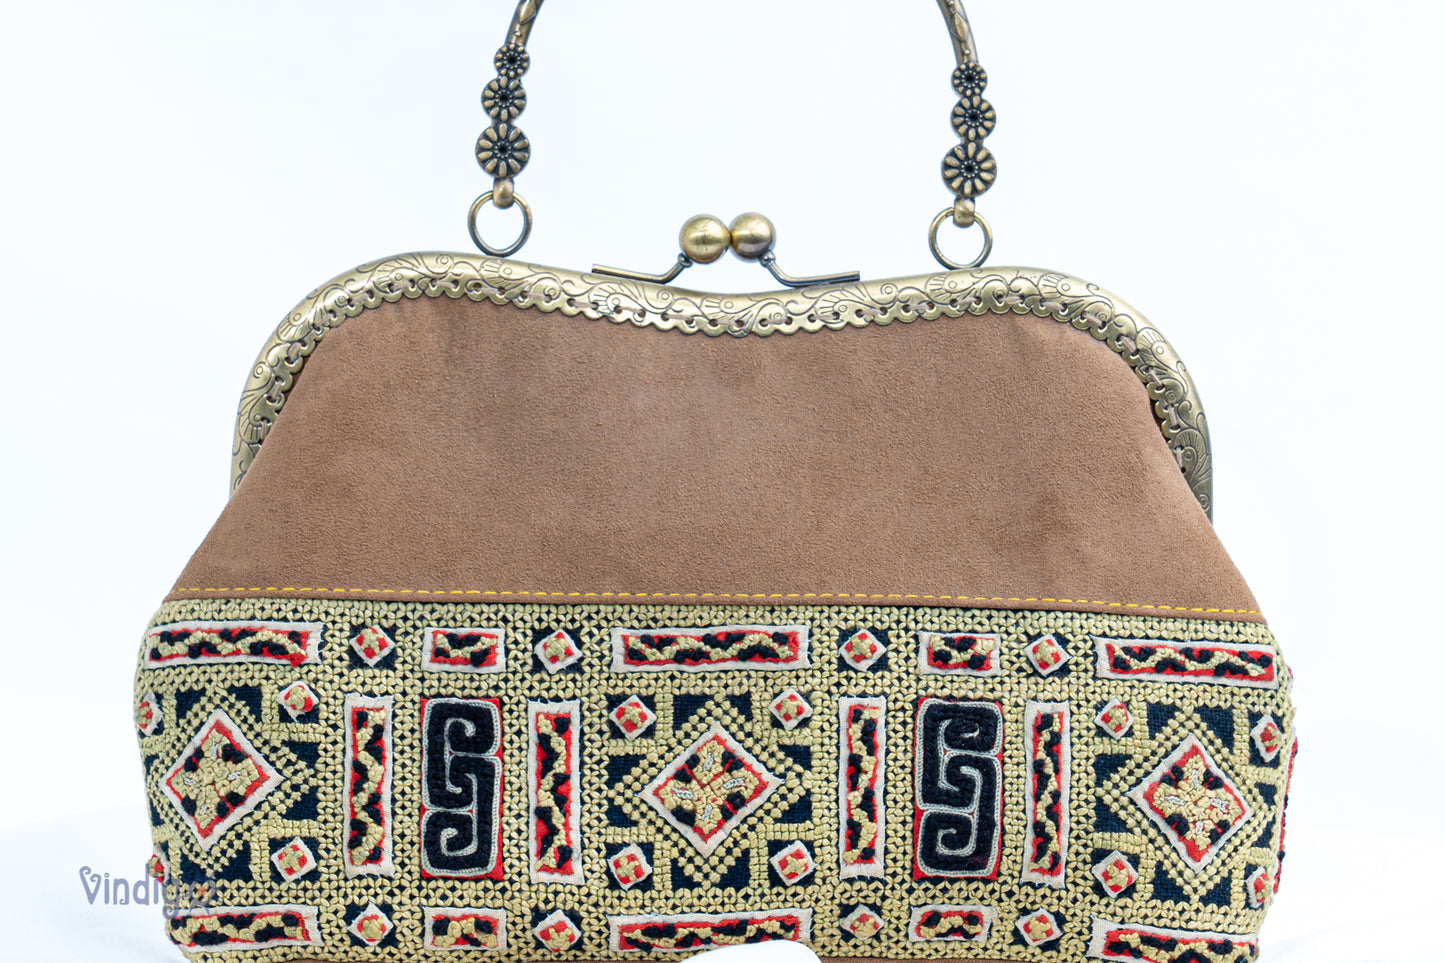 Suede leather bag with vintage tribal embroidery and copper-binding